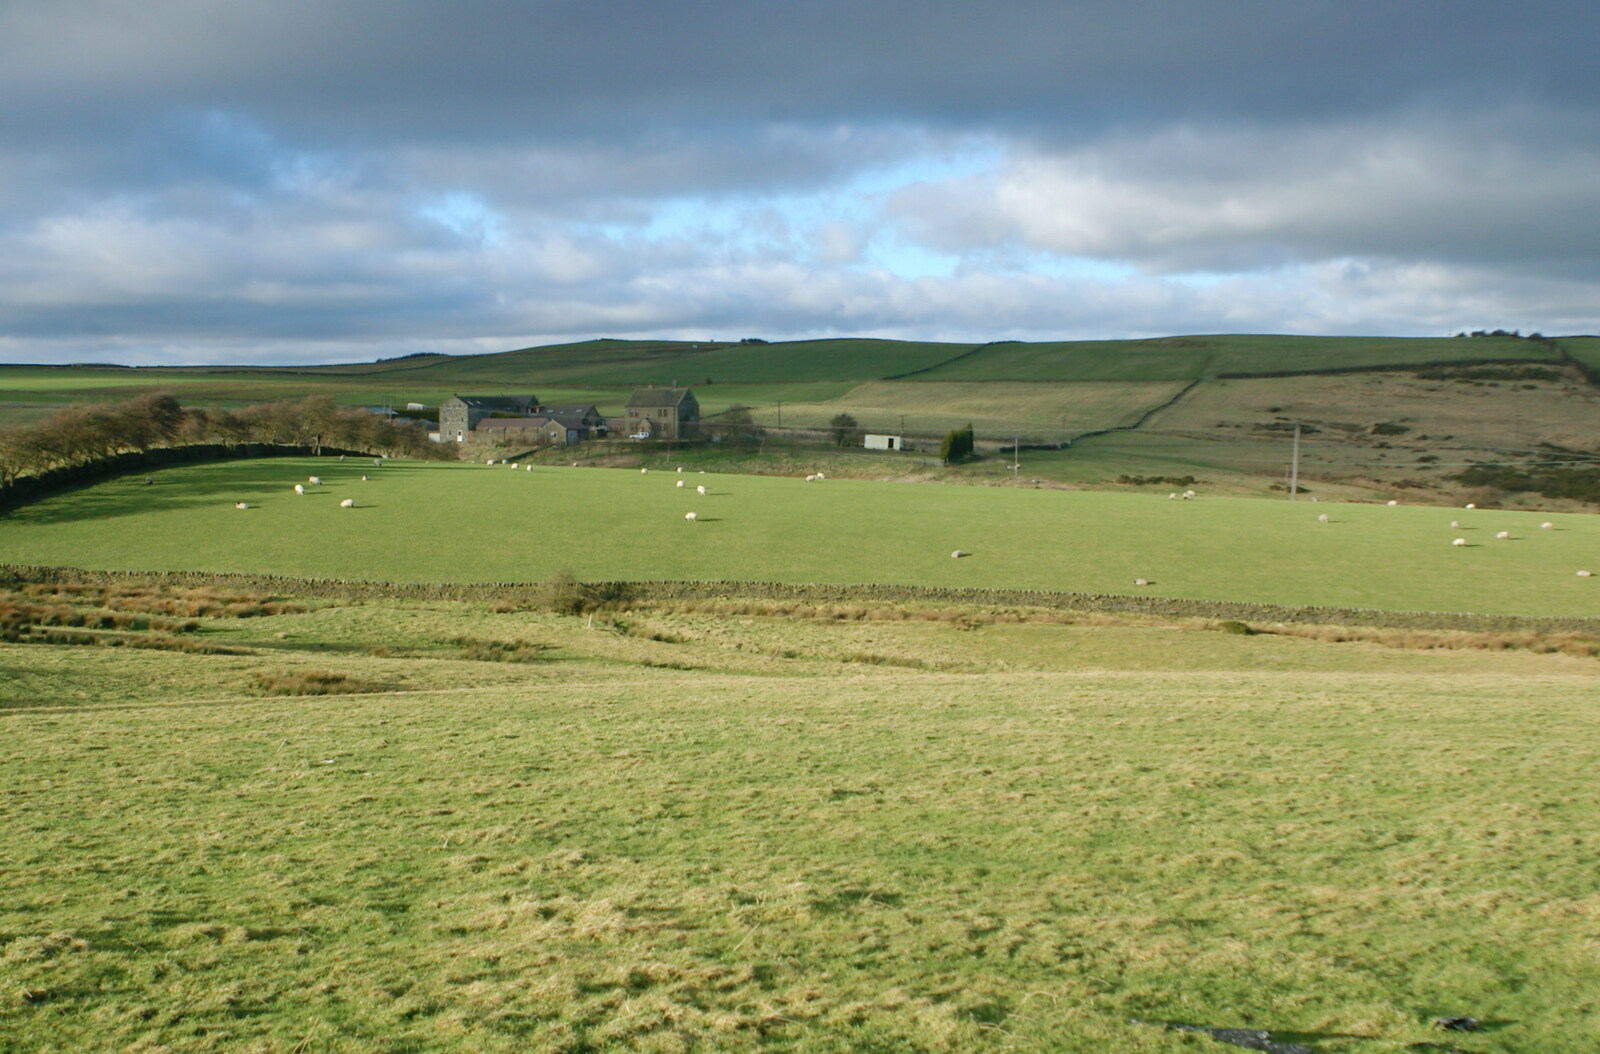 Driving Around Oop North, Hoylandswain, West Yorkshire - 30th January 2005: A farmhouse, and a field dotted with sheep